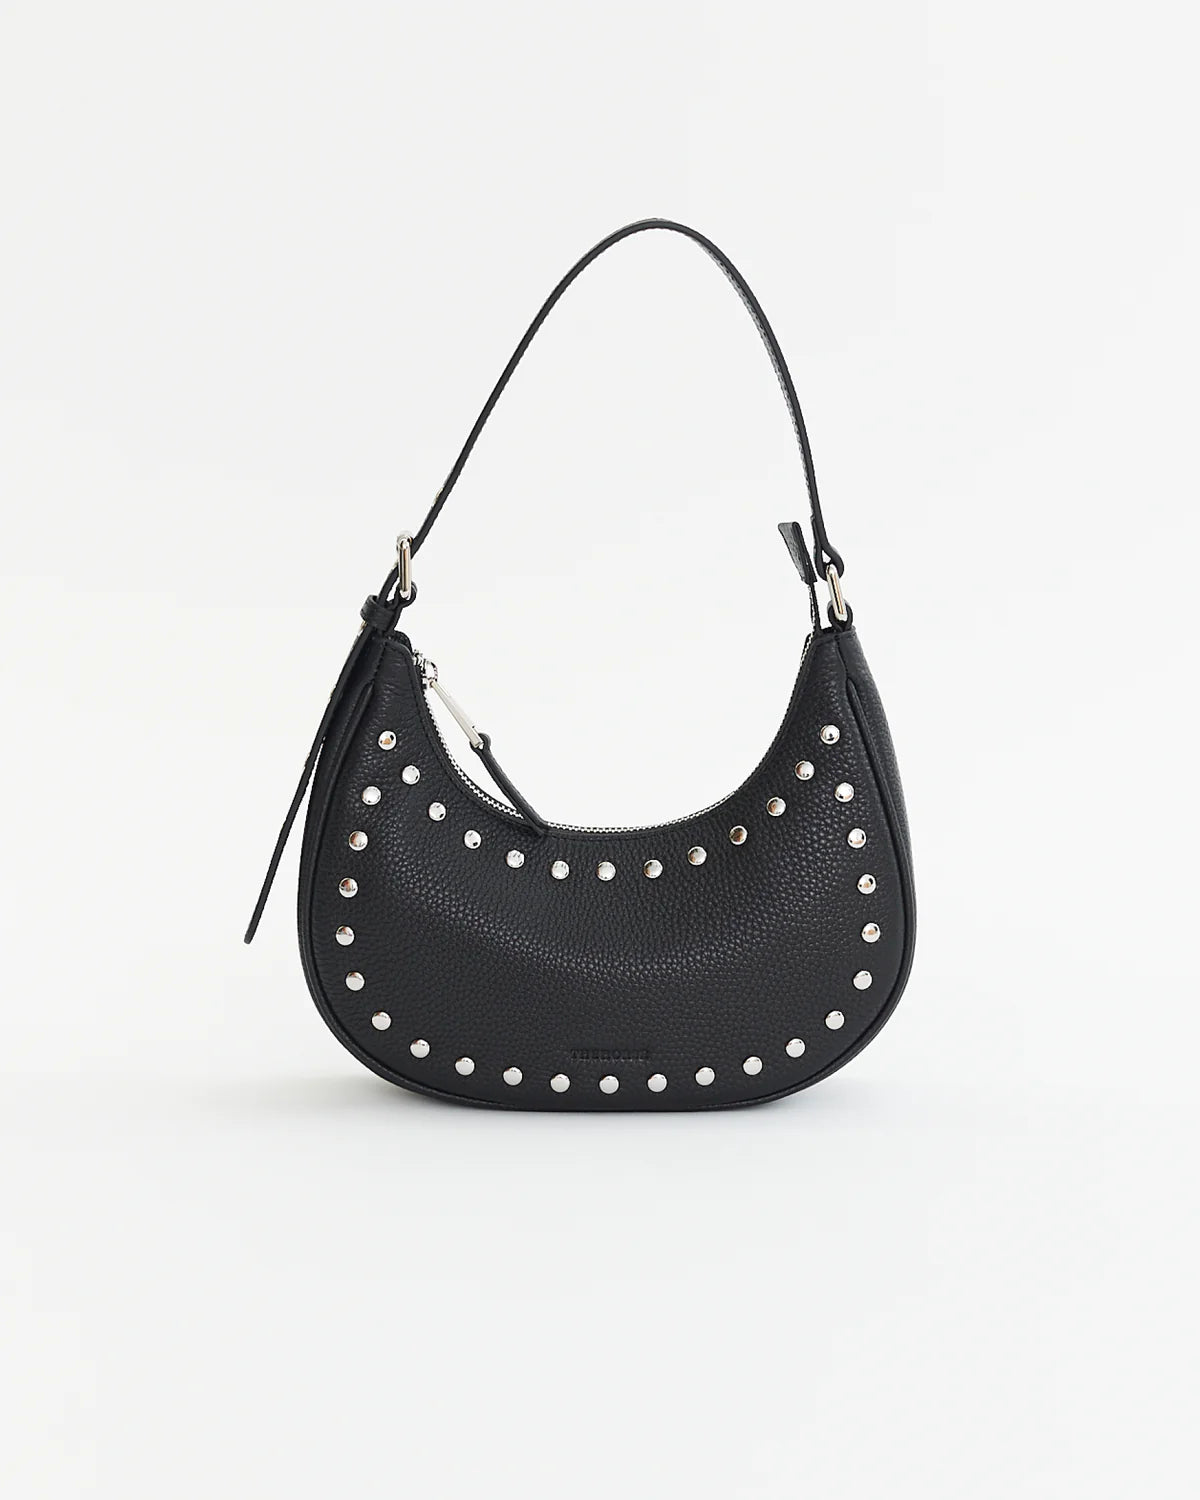 Friday Bag || Black With Studs